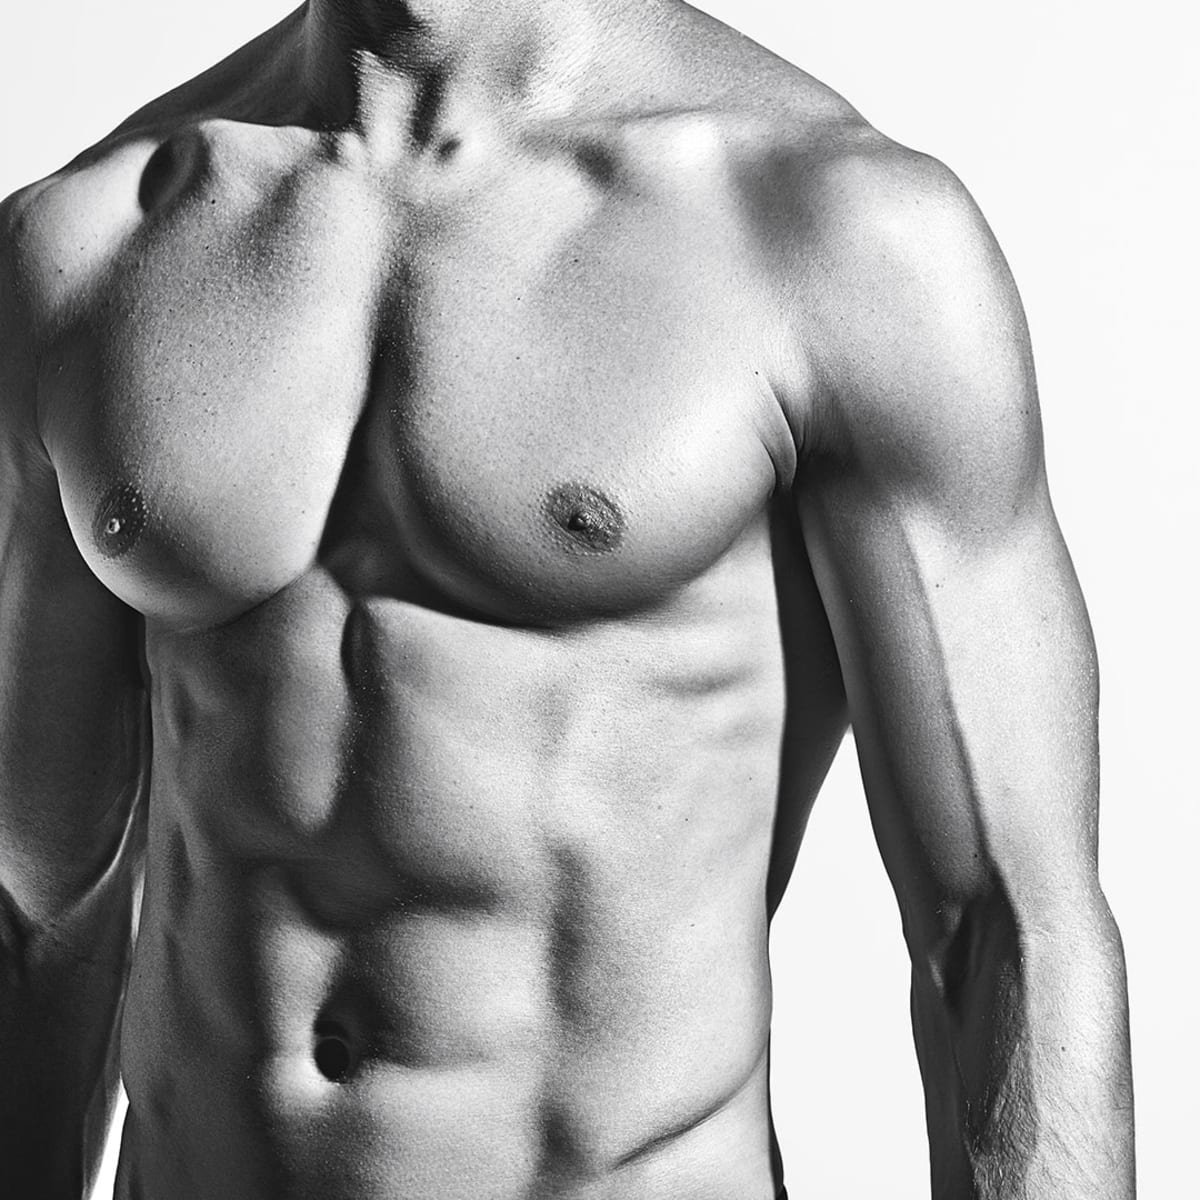 The Massive Muscle Bulk-Up: How to Gain 5 Pounds in 5 Weeks - Men's Journal